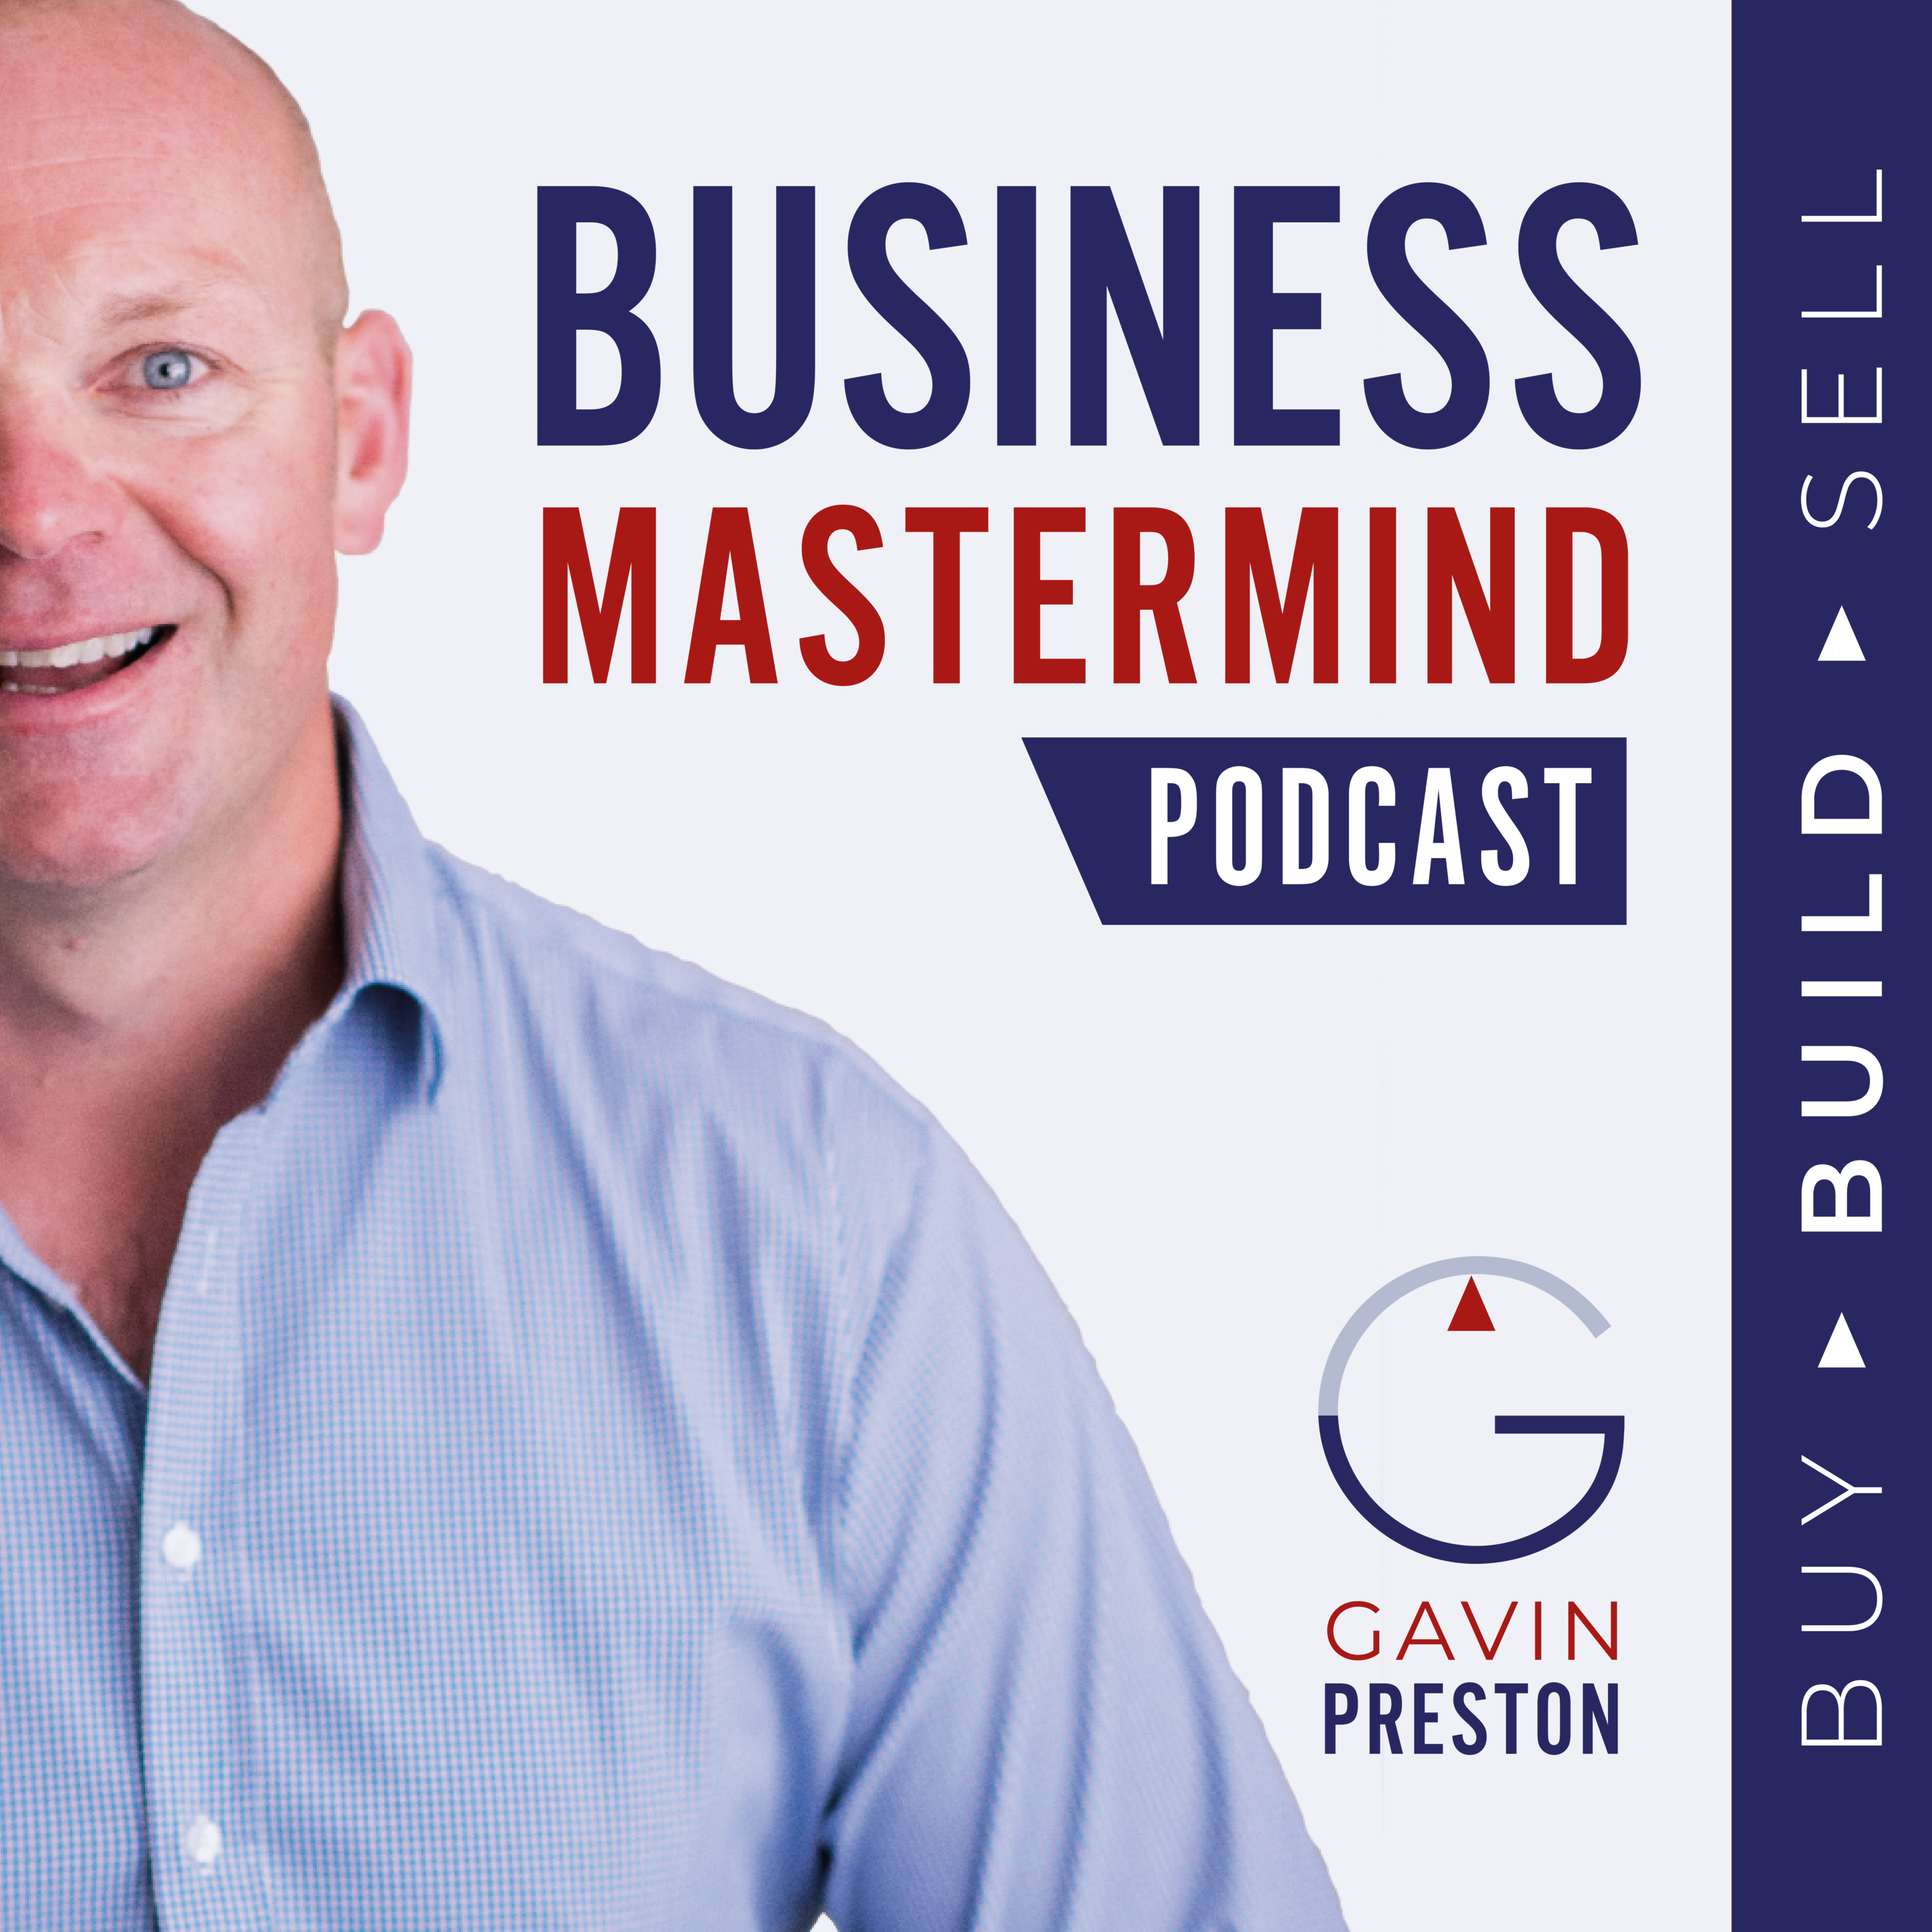 The Business Mastermind Podcast – Revive: Life Metamorphosis: How to Create Change and Momentum in Your Life and Career with Jay Munoz, Author of Property Metamorphisis